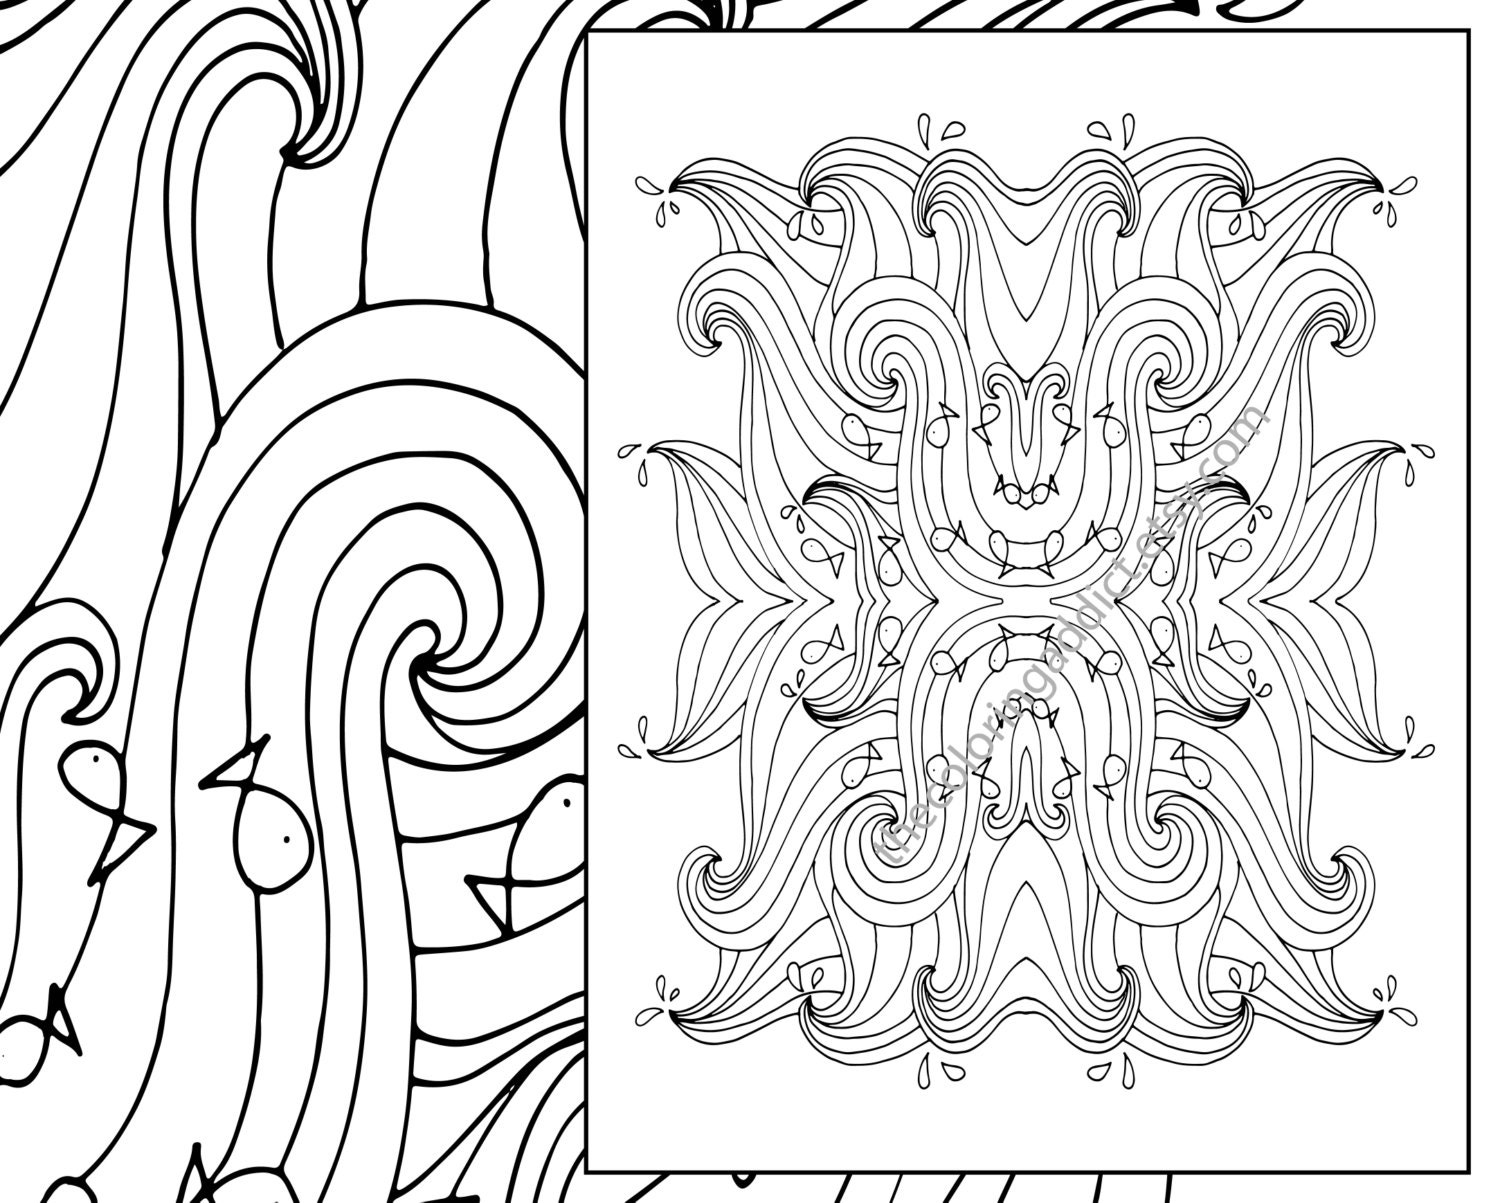 ocean wave adult coloring page beach adult coloring sheet